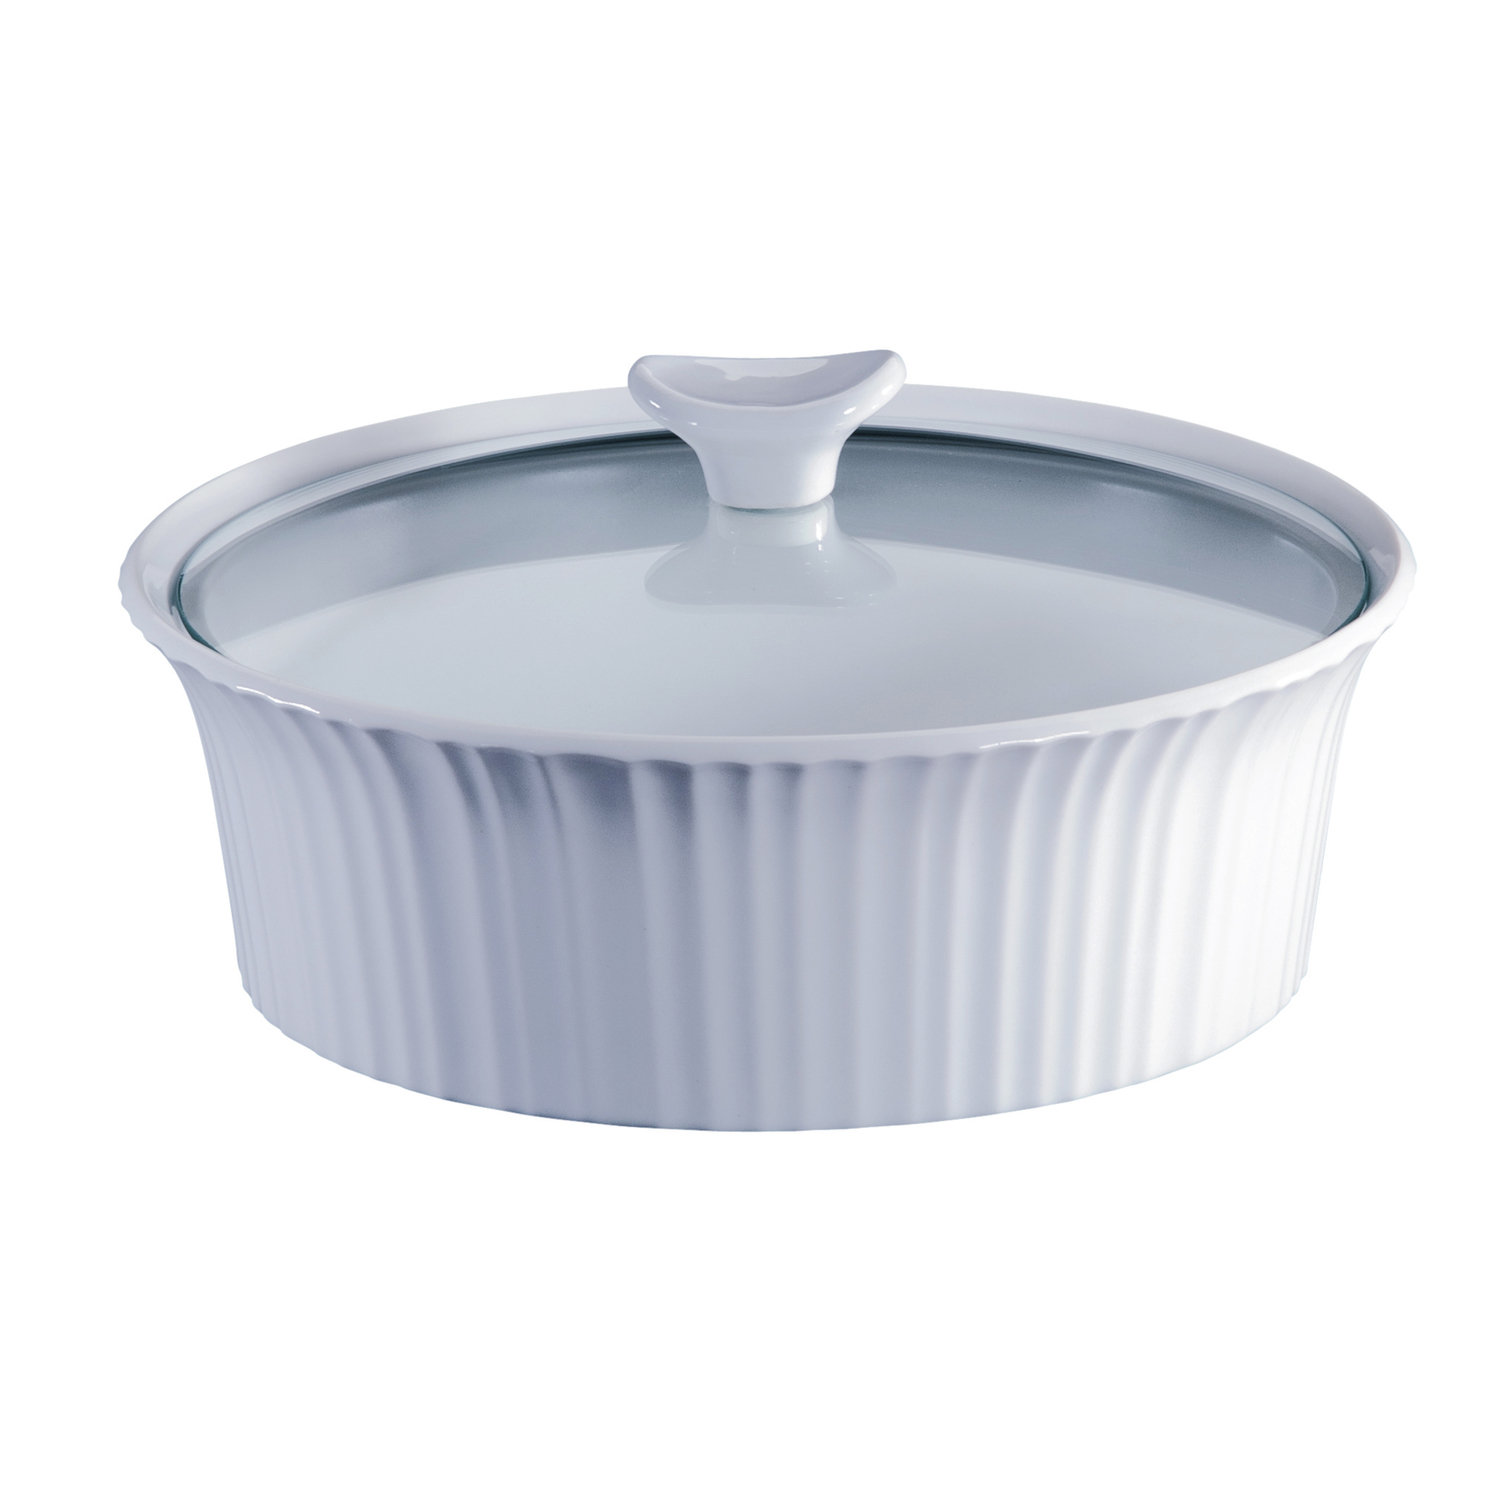 CorningWare Square Baking Dish 3 qt with Lid - Spice of Life – M